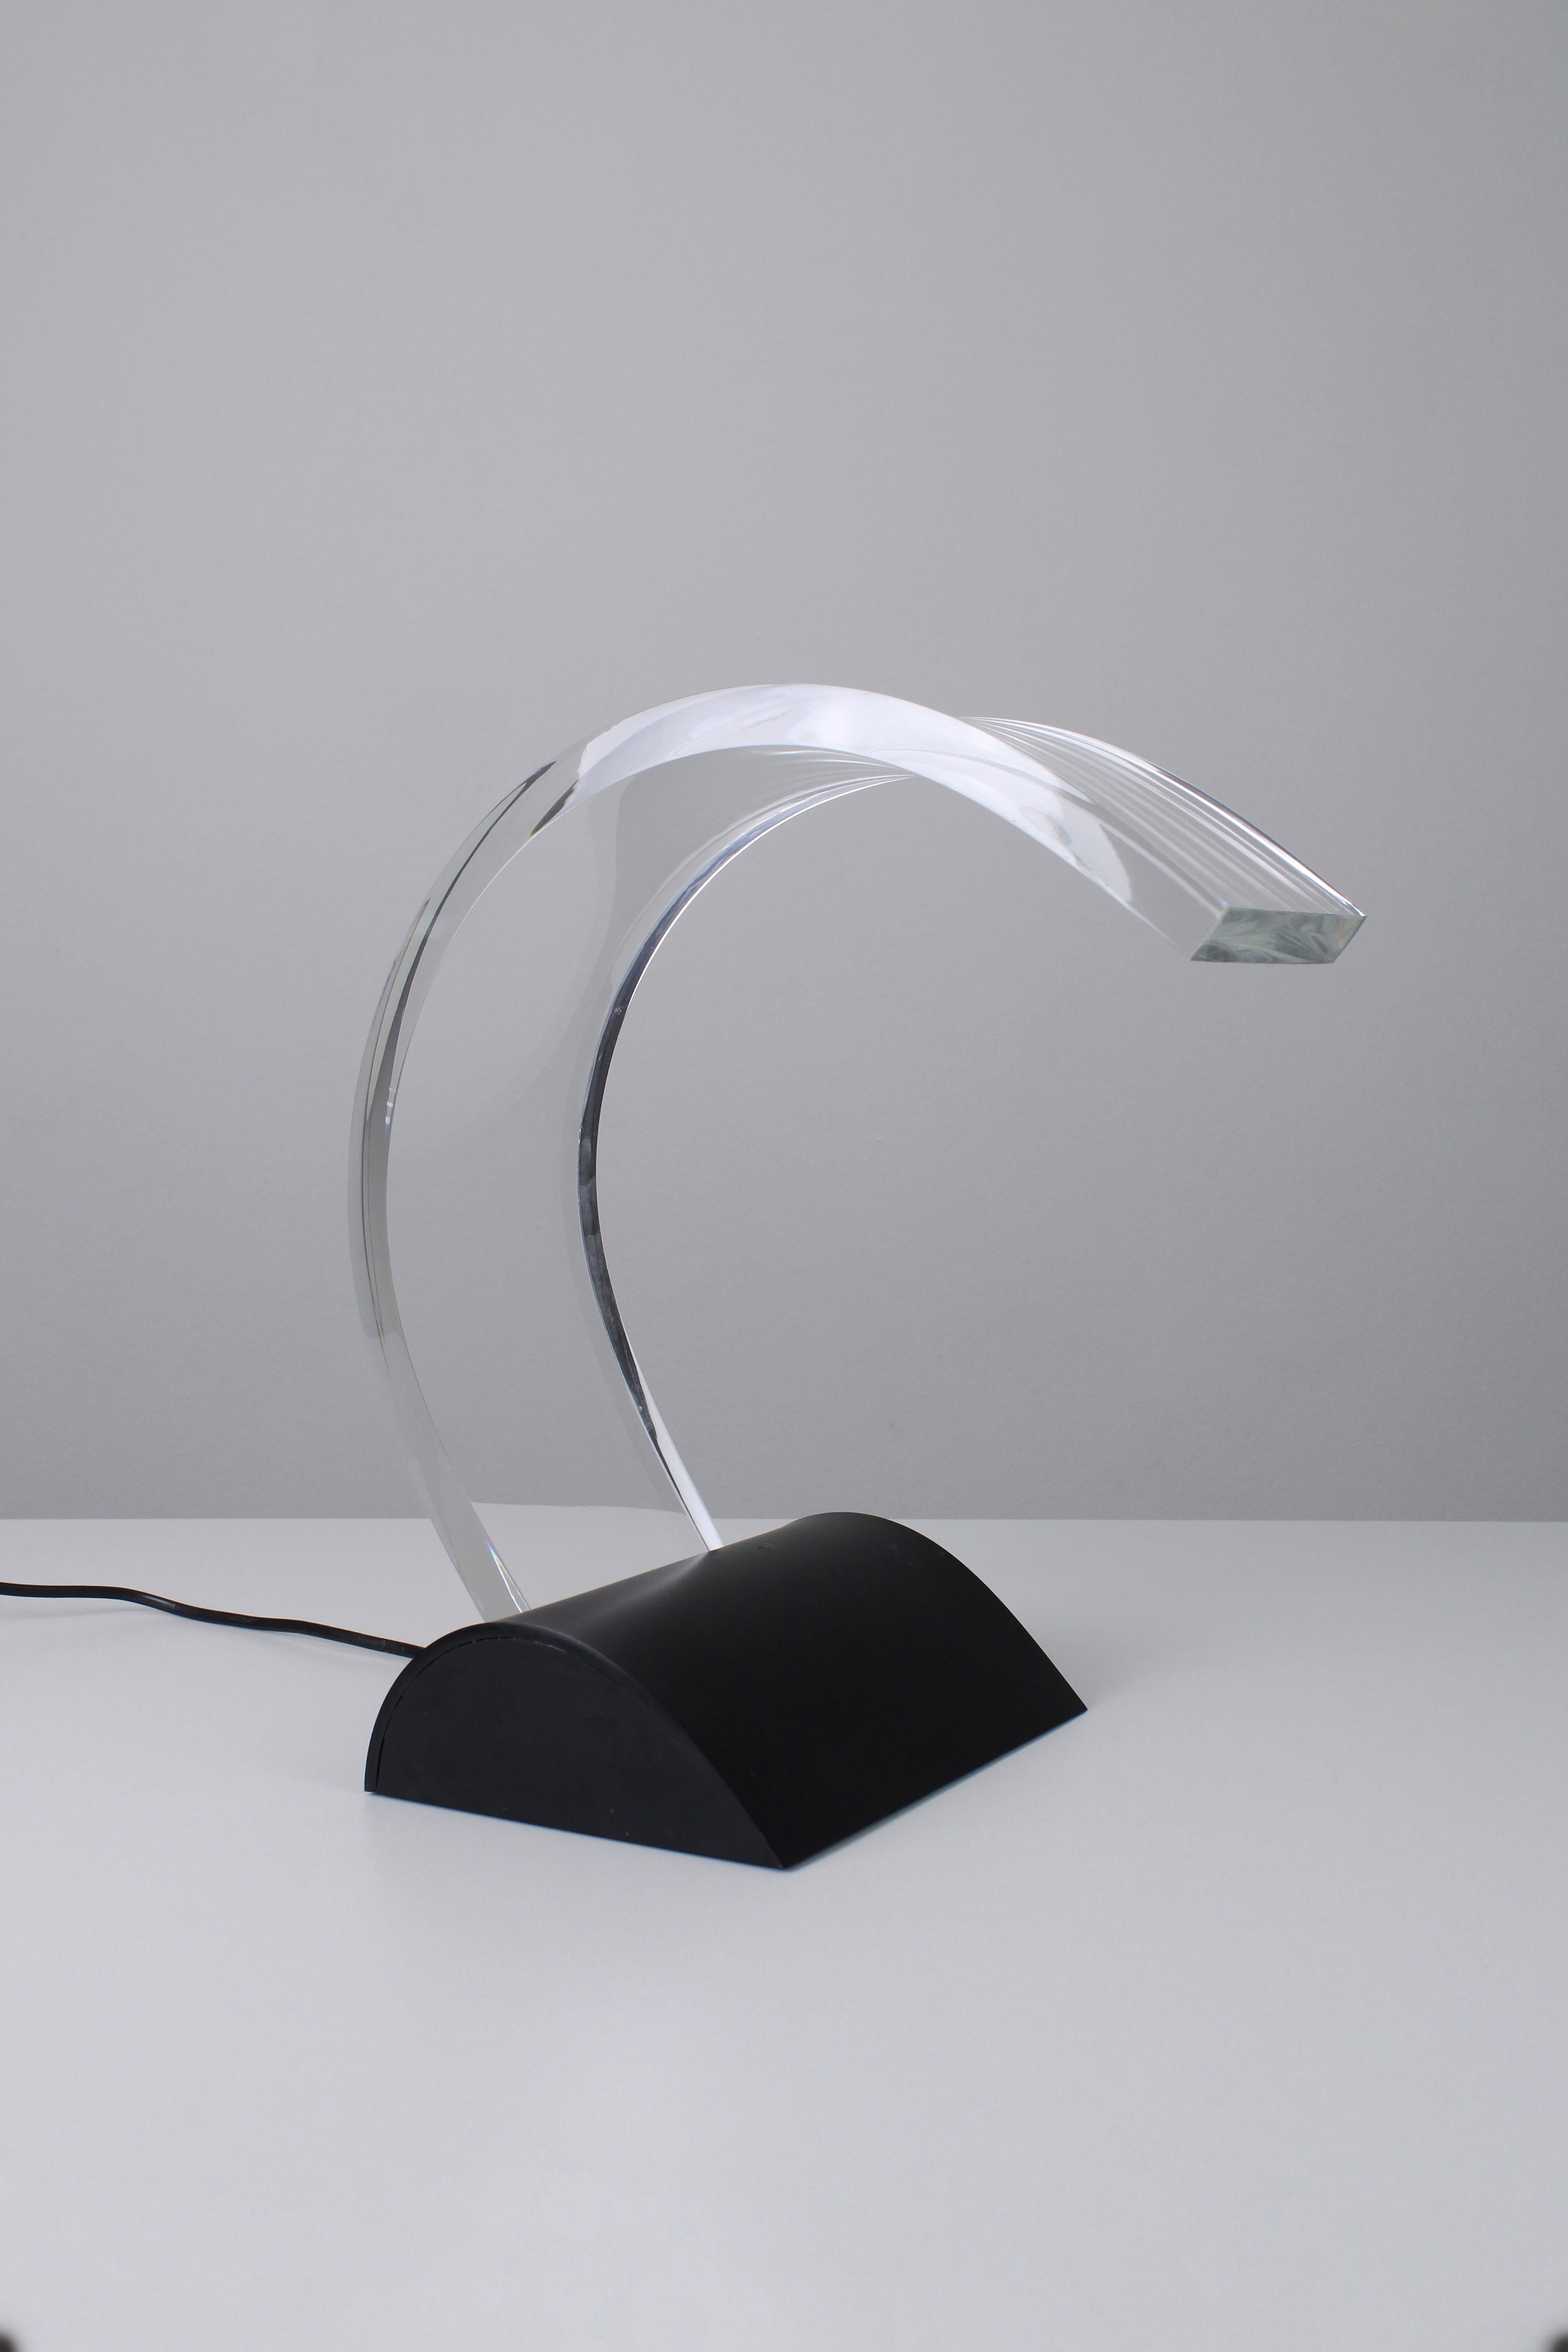 Lune desk lamp. Designed by Wout Wessemius in 1982. The design of this lamp consists of a large acrylic arc. In the base is a light that shines all the way through to the end of the arc on the surface. Unique lamp in overall good condition. There